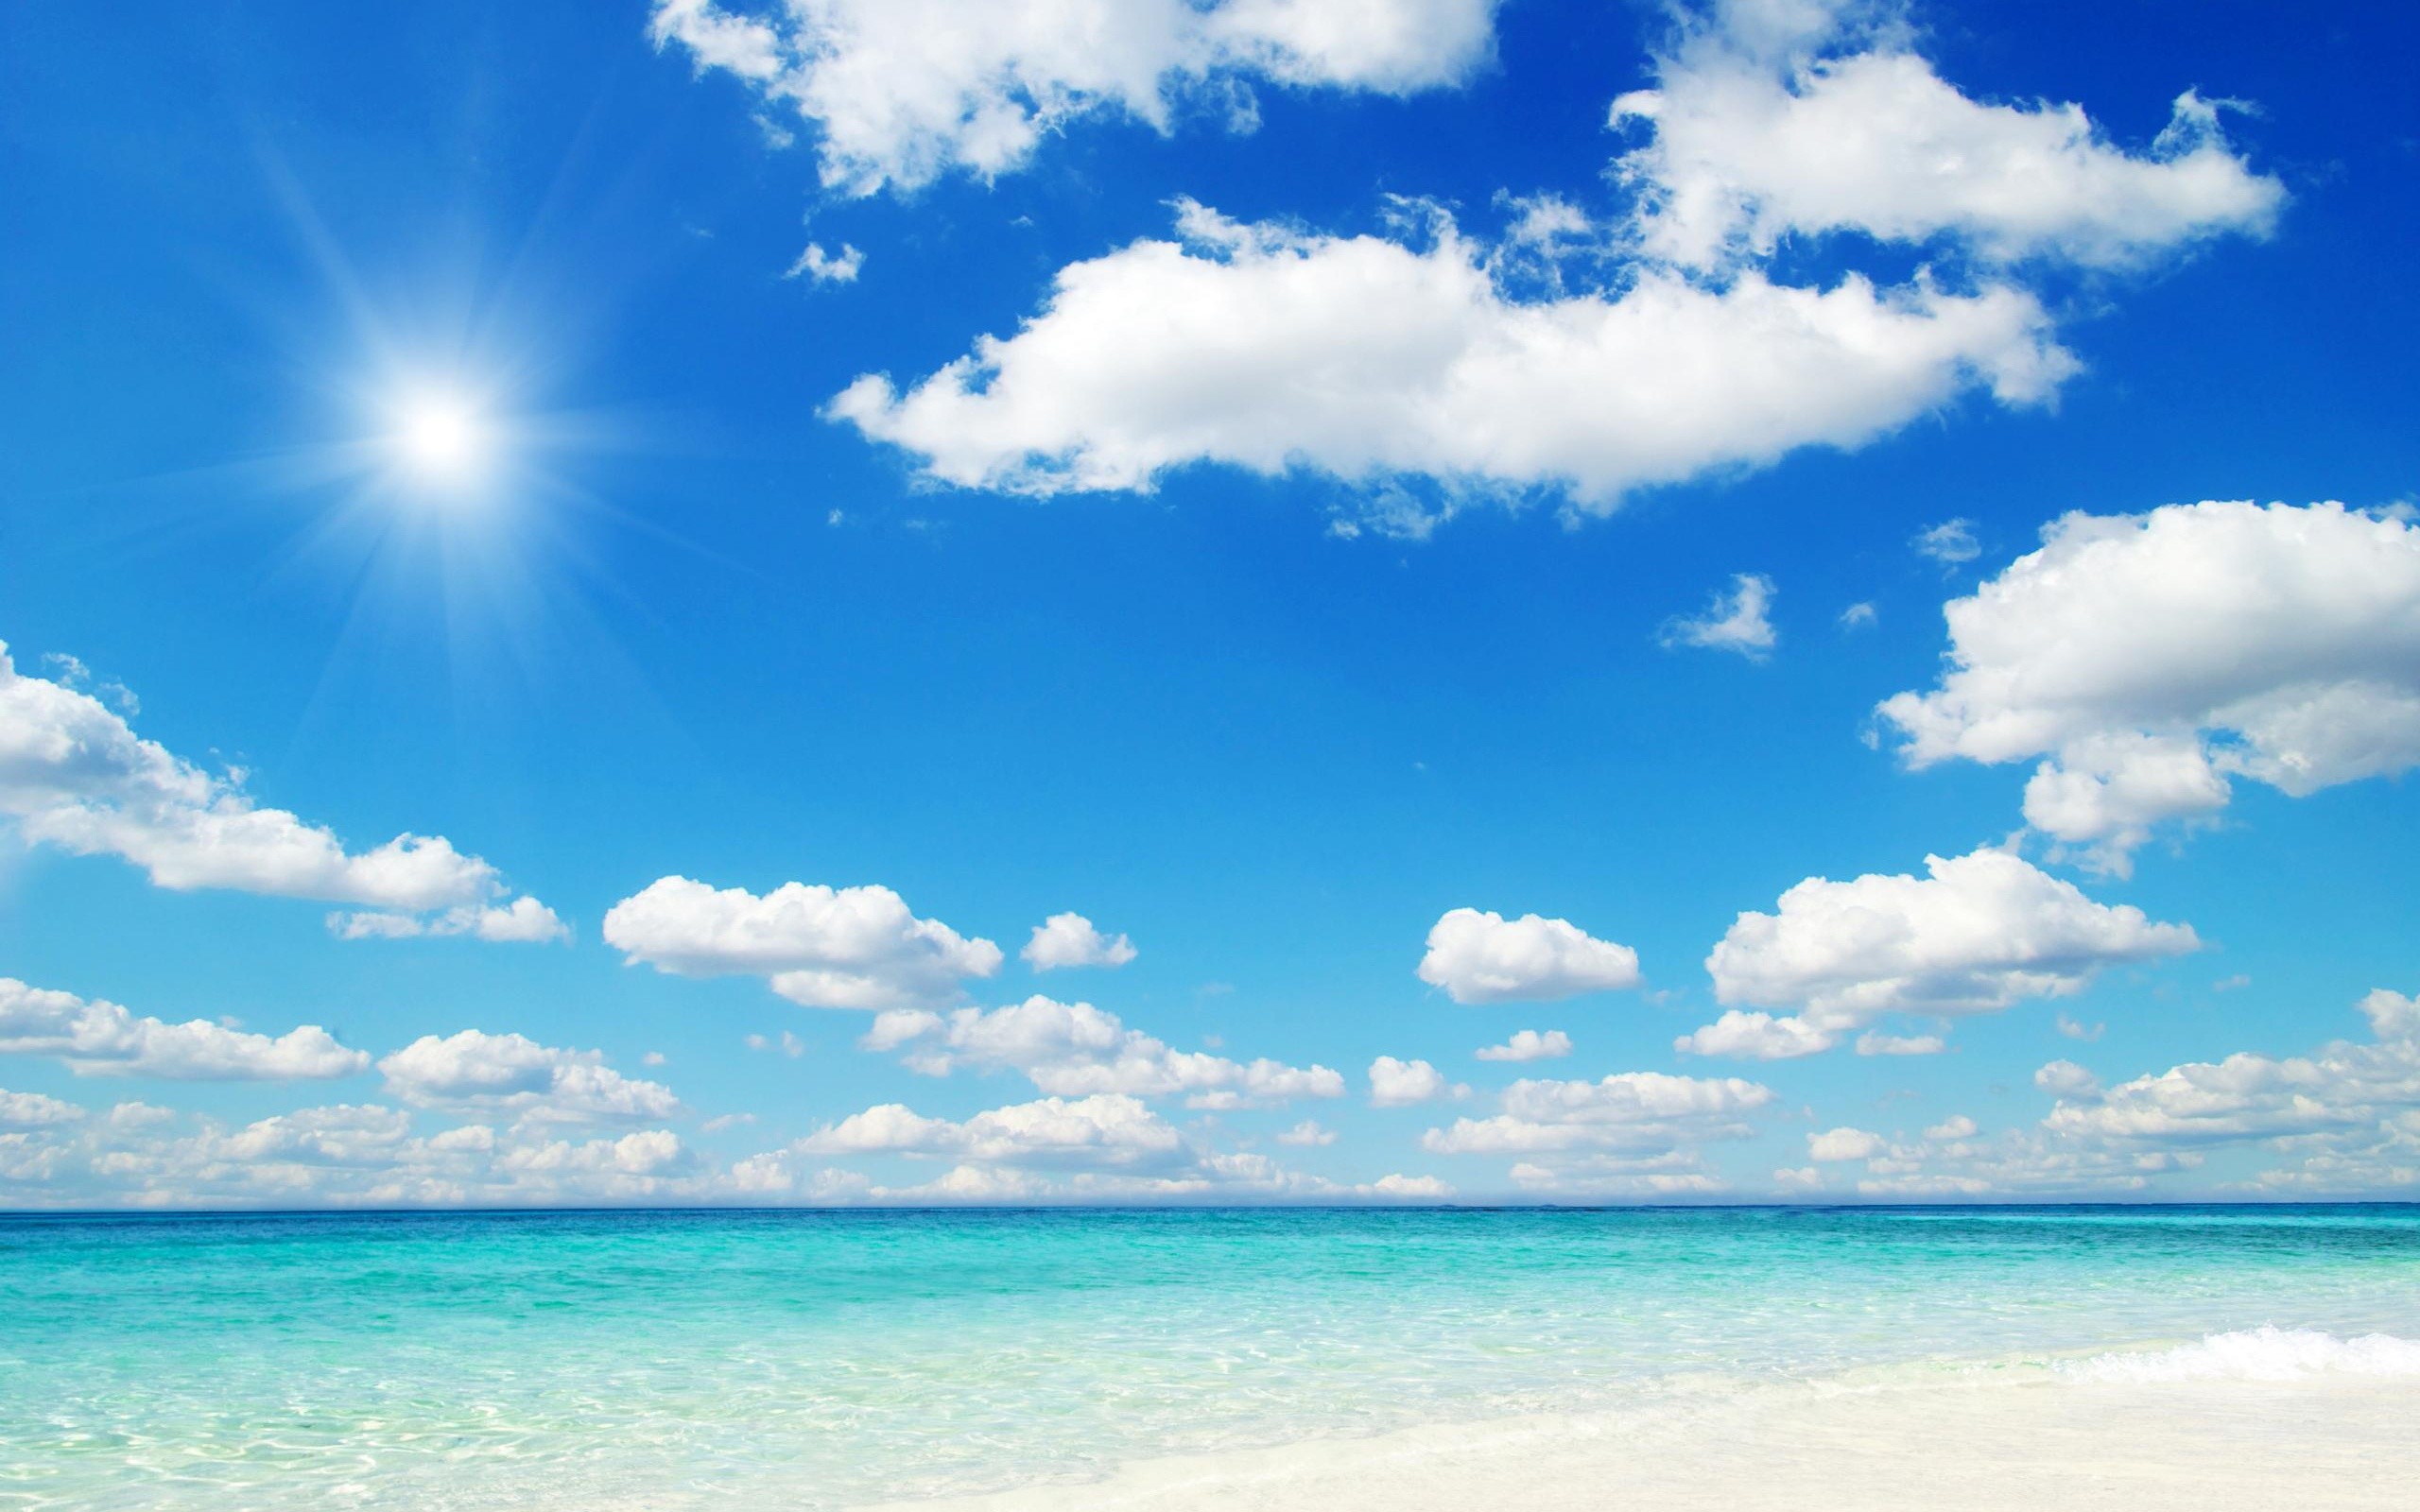 sky and sea background images